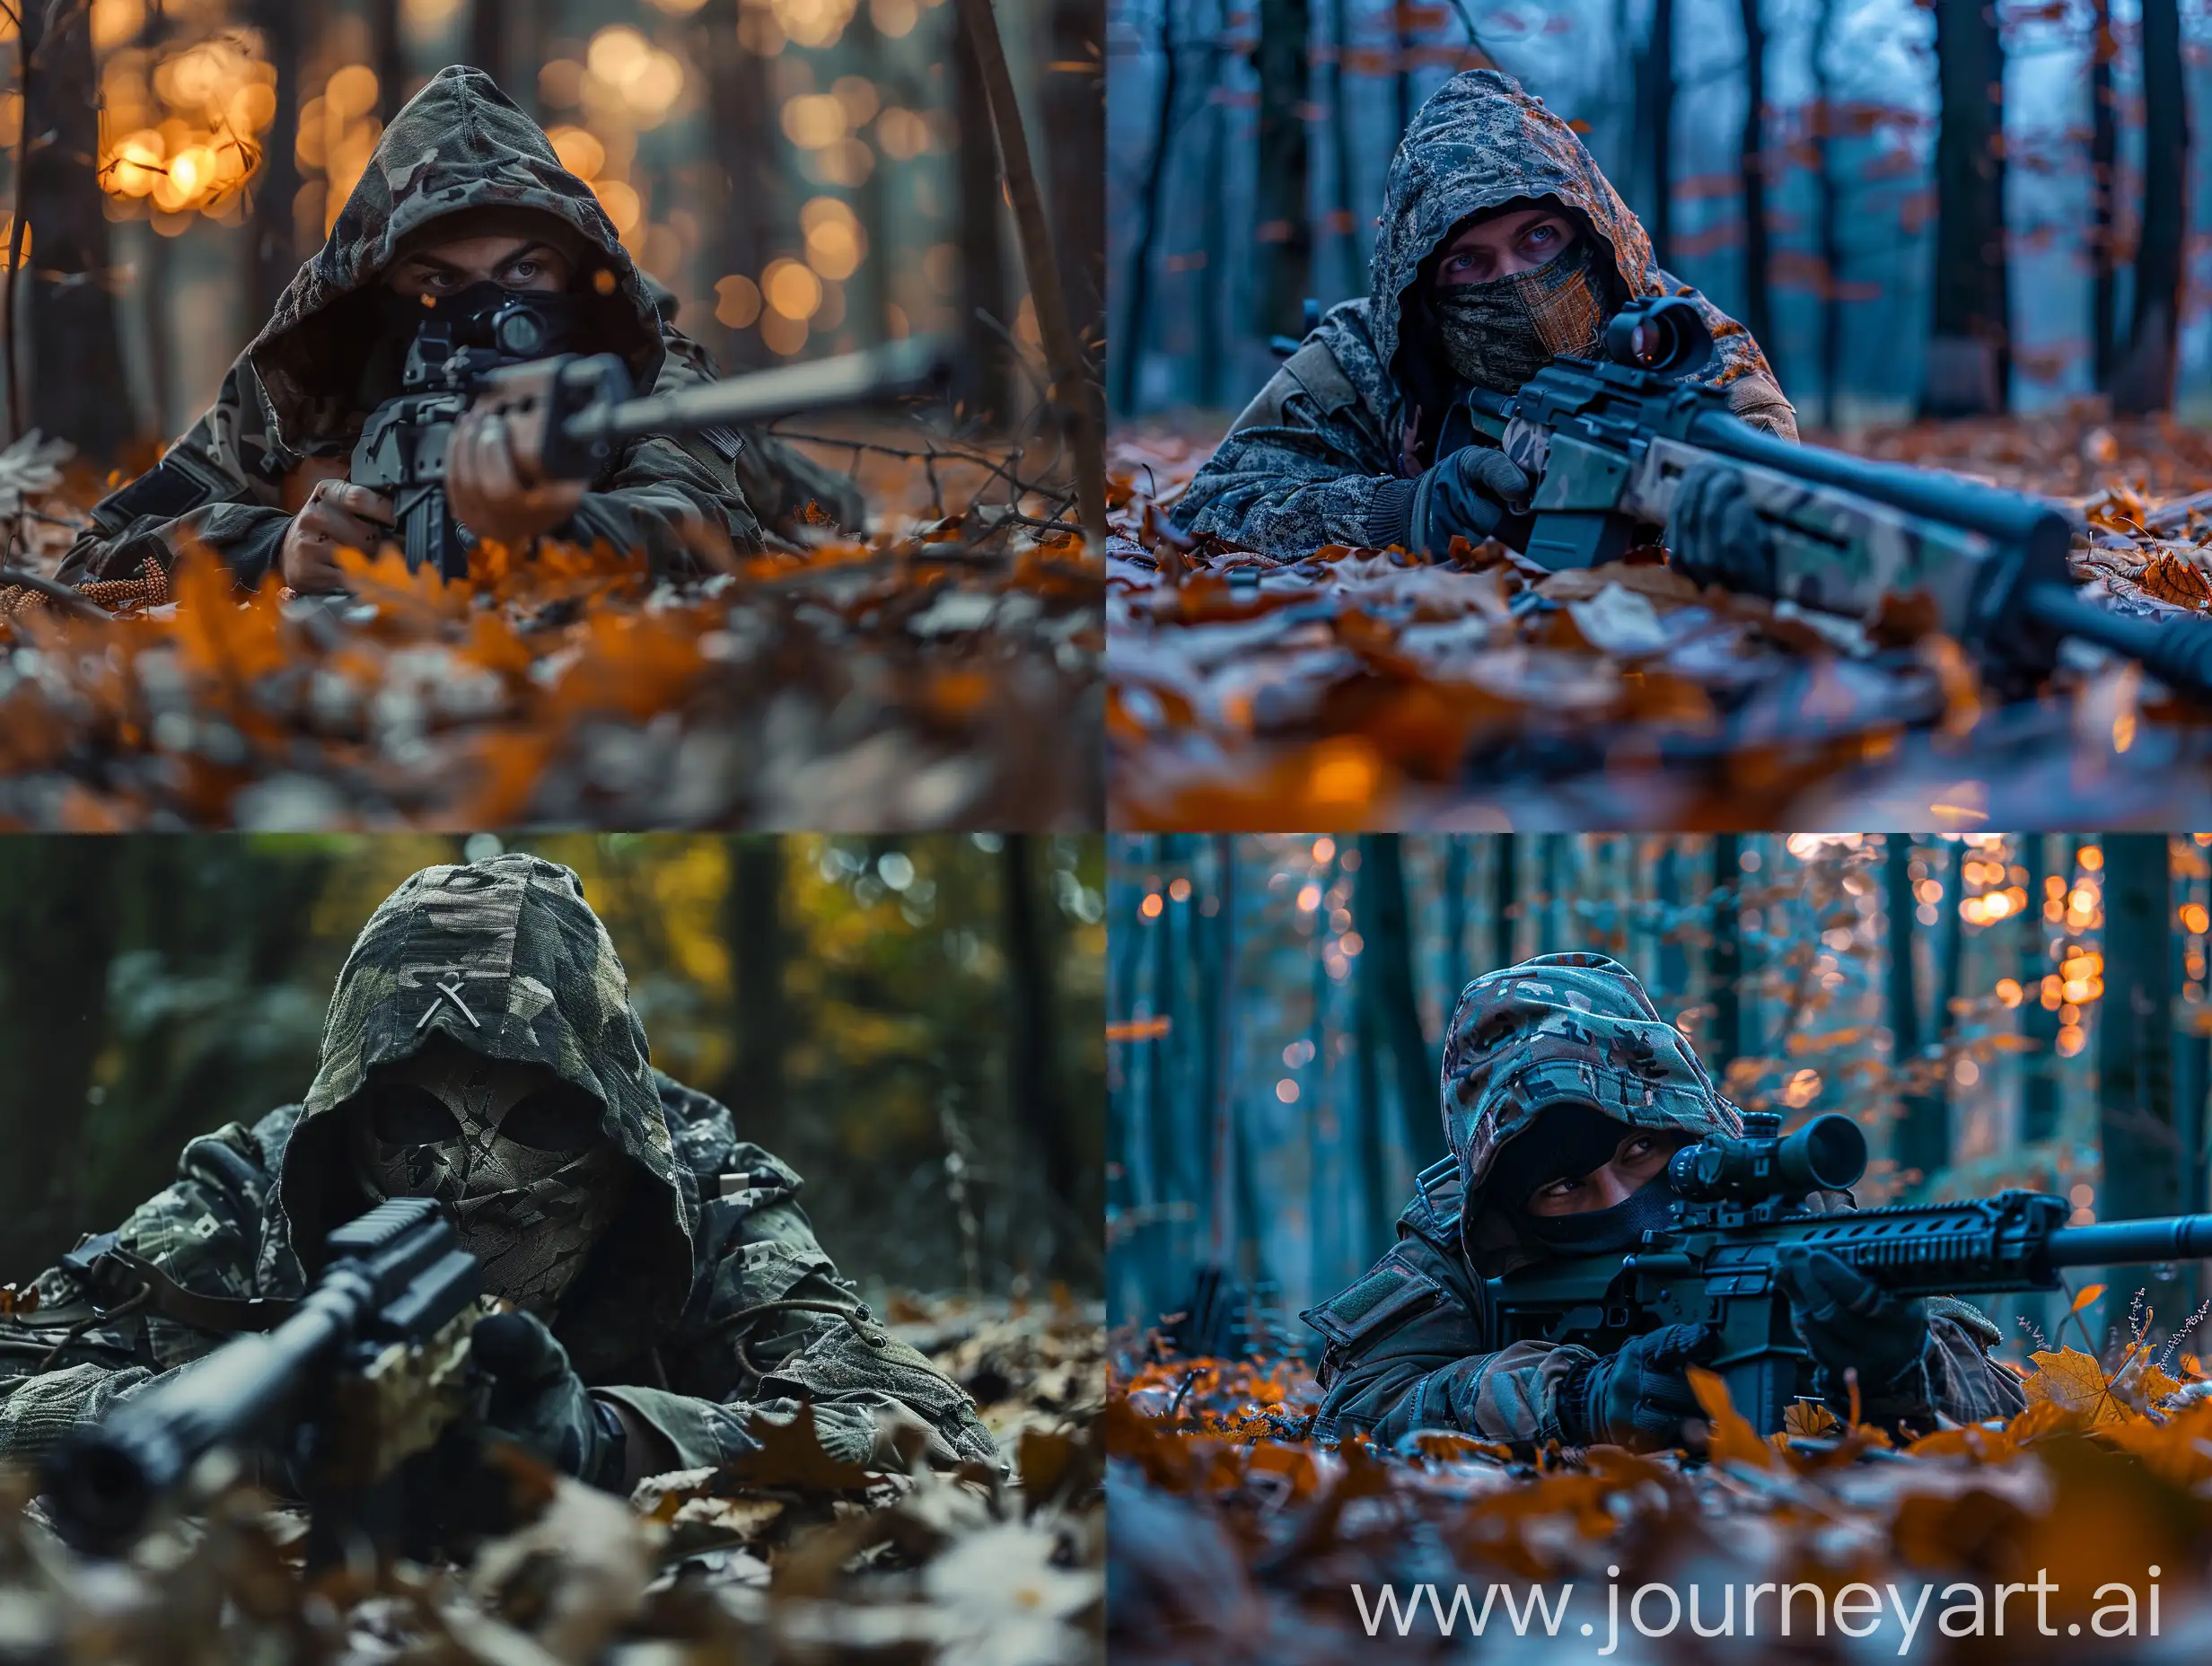 Camouflaged-Sniper-Lying-in-Forest-Setting-with-Rifle